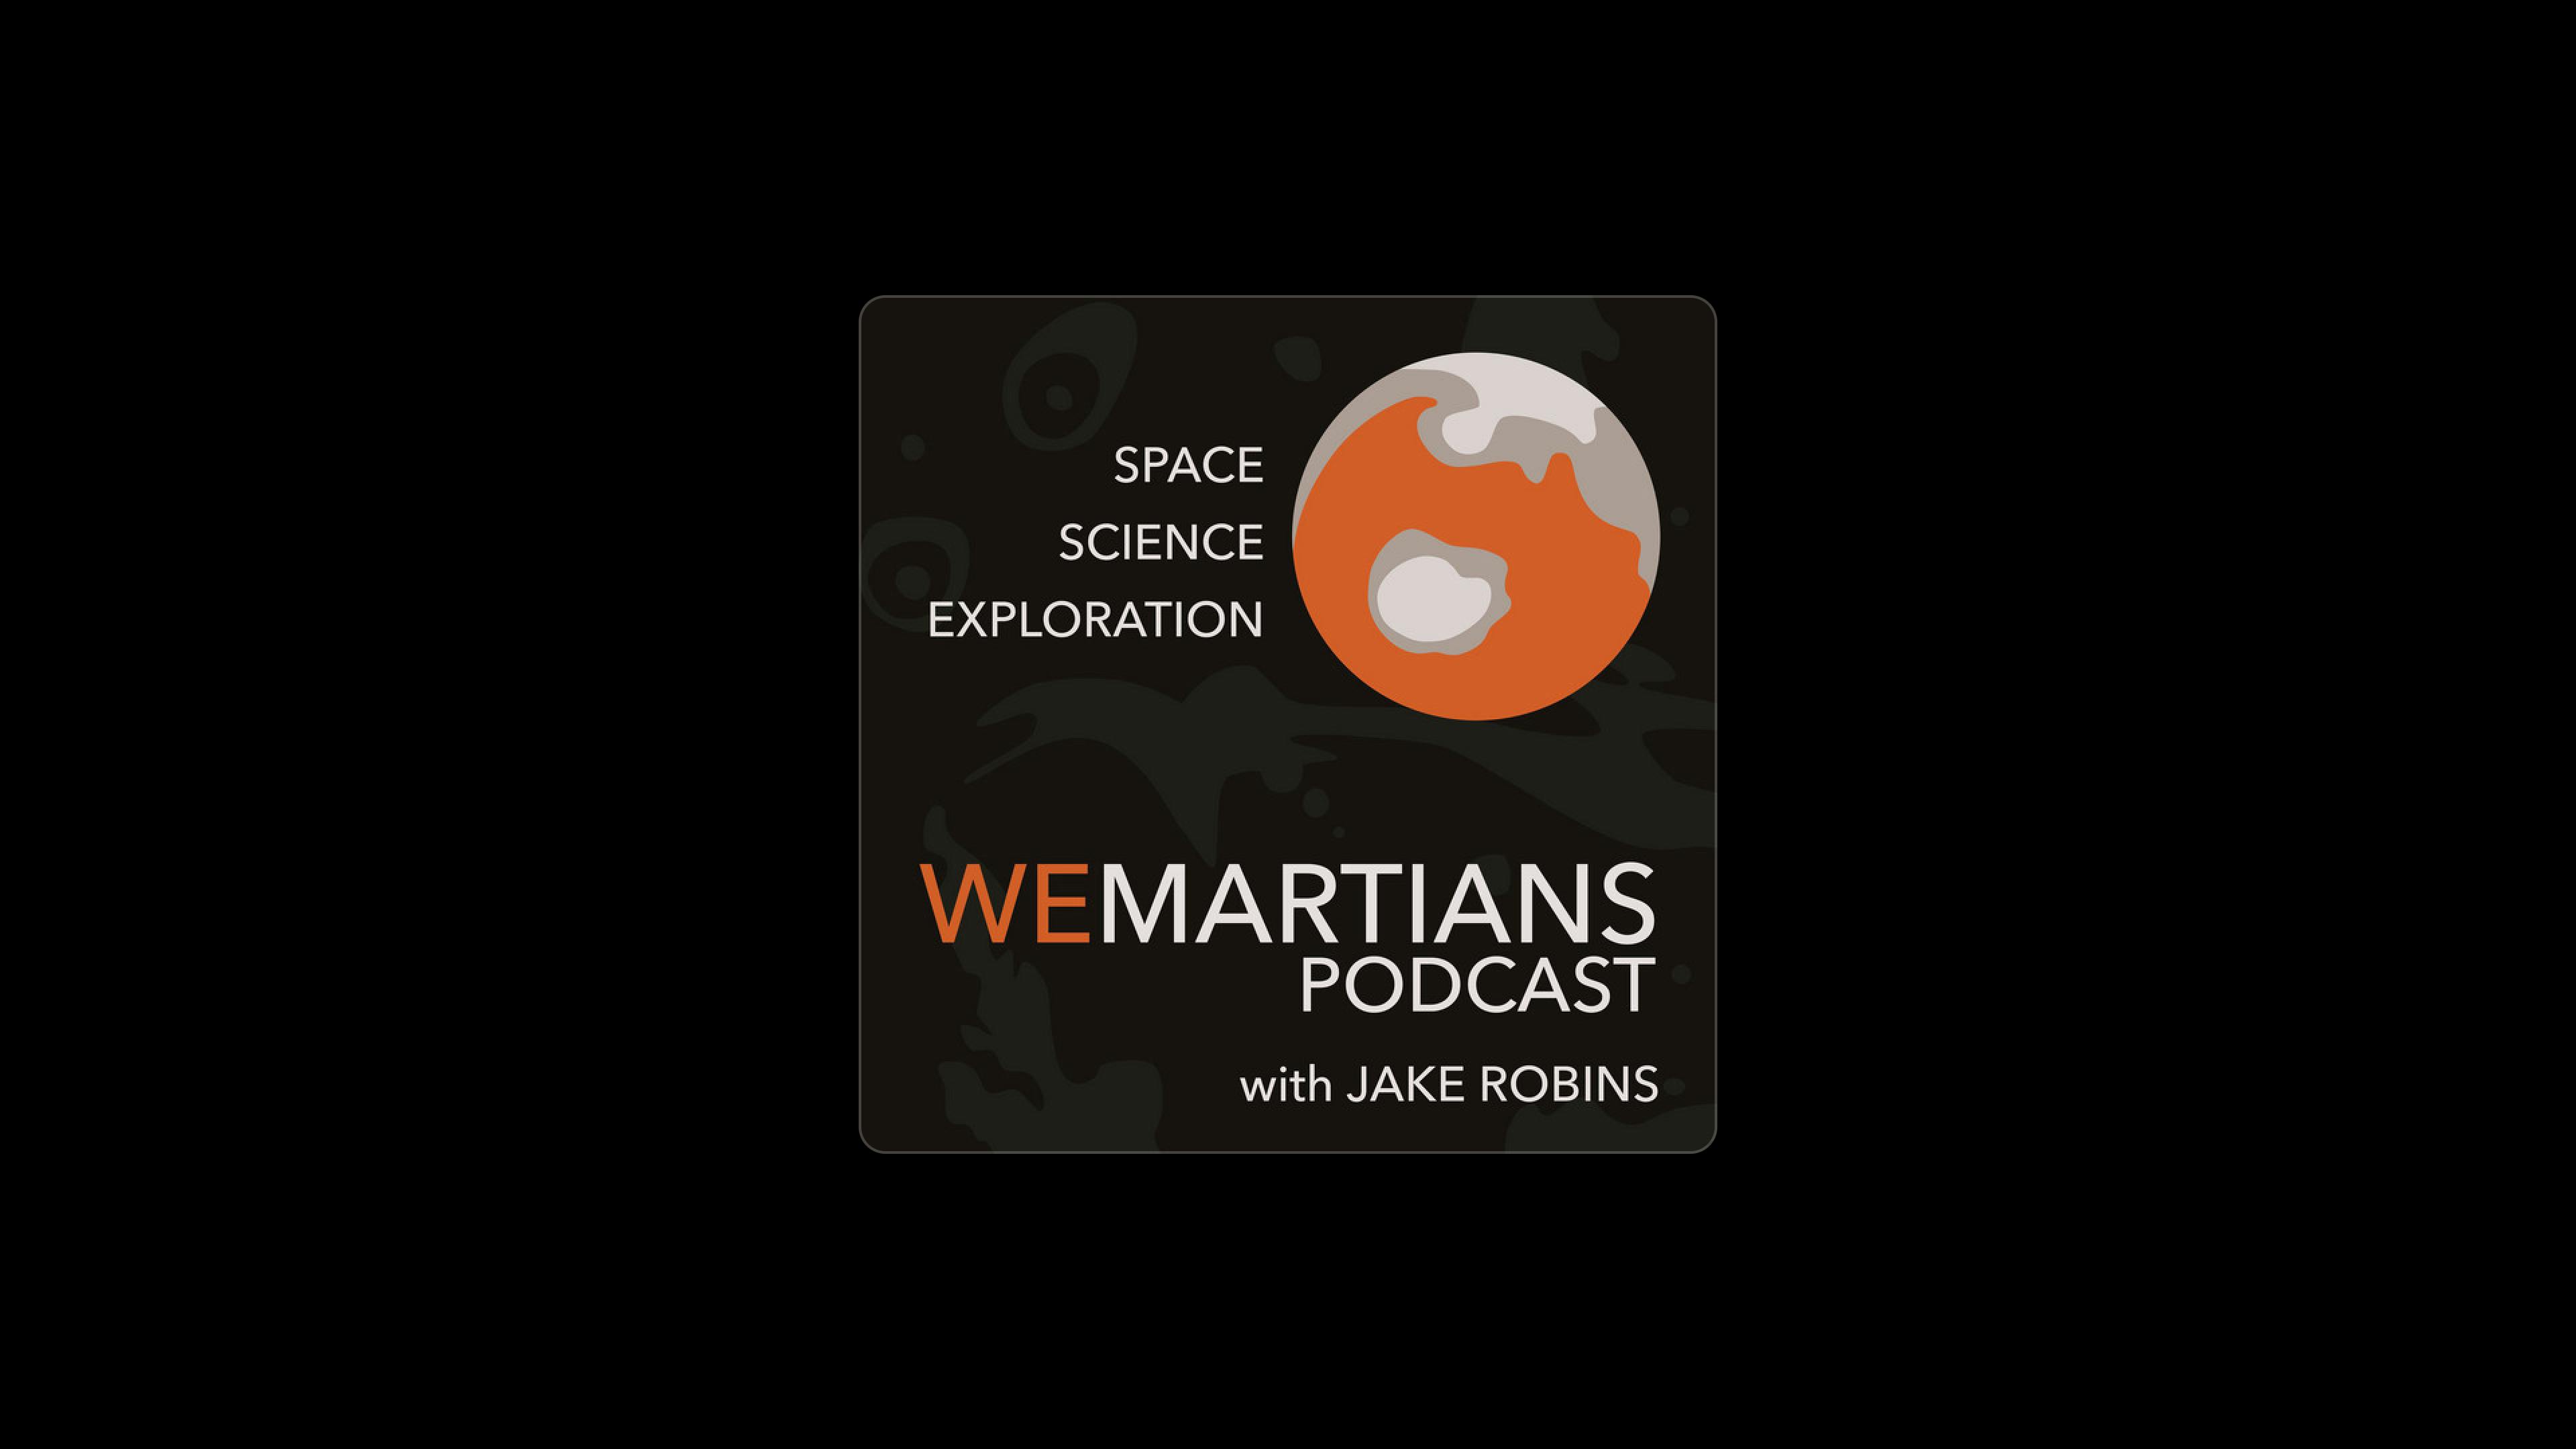 We Martians space podcast